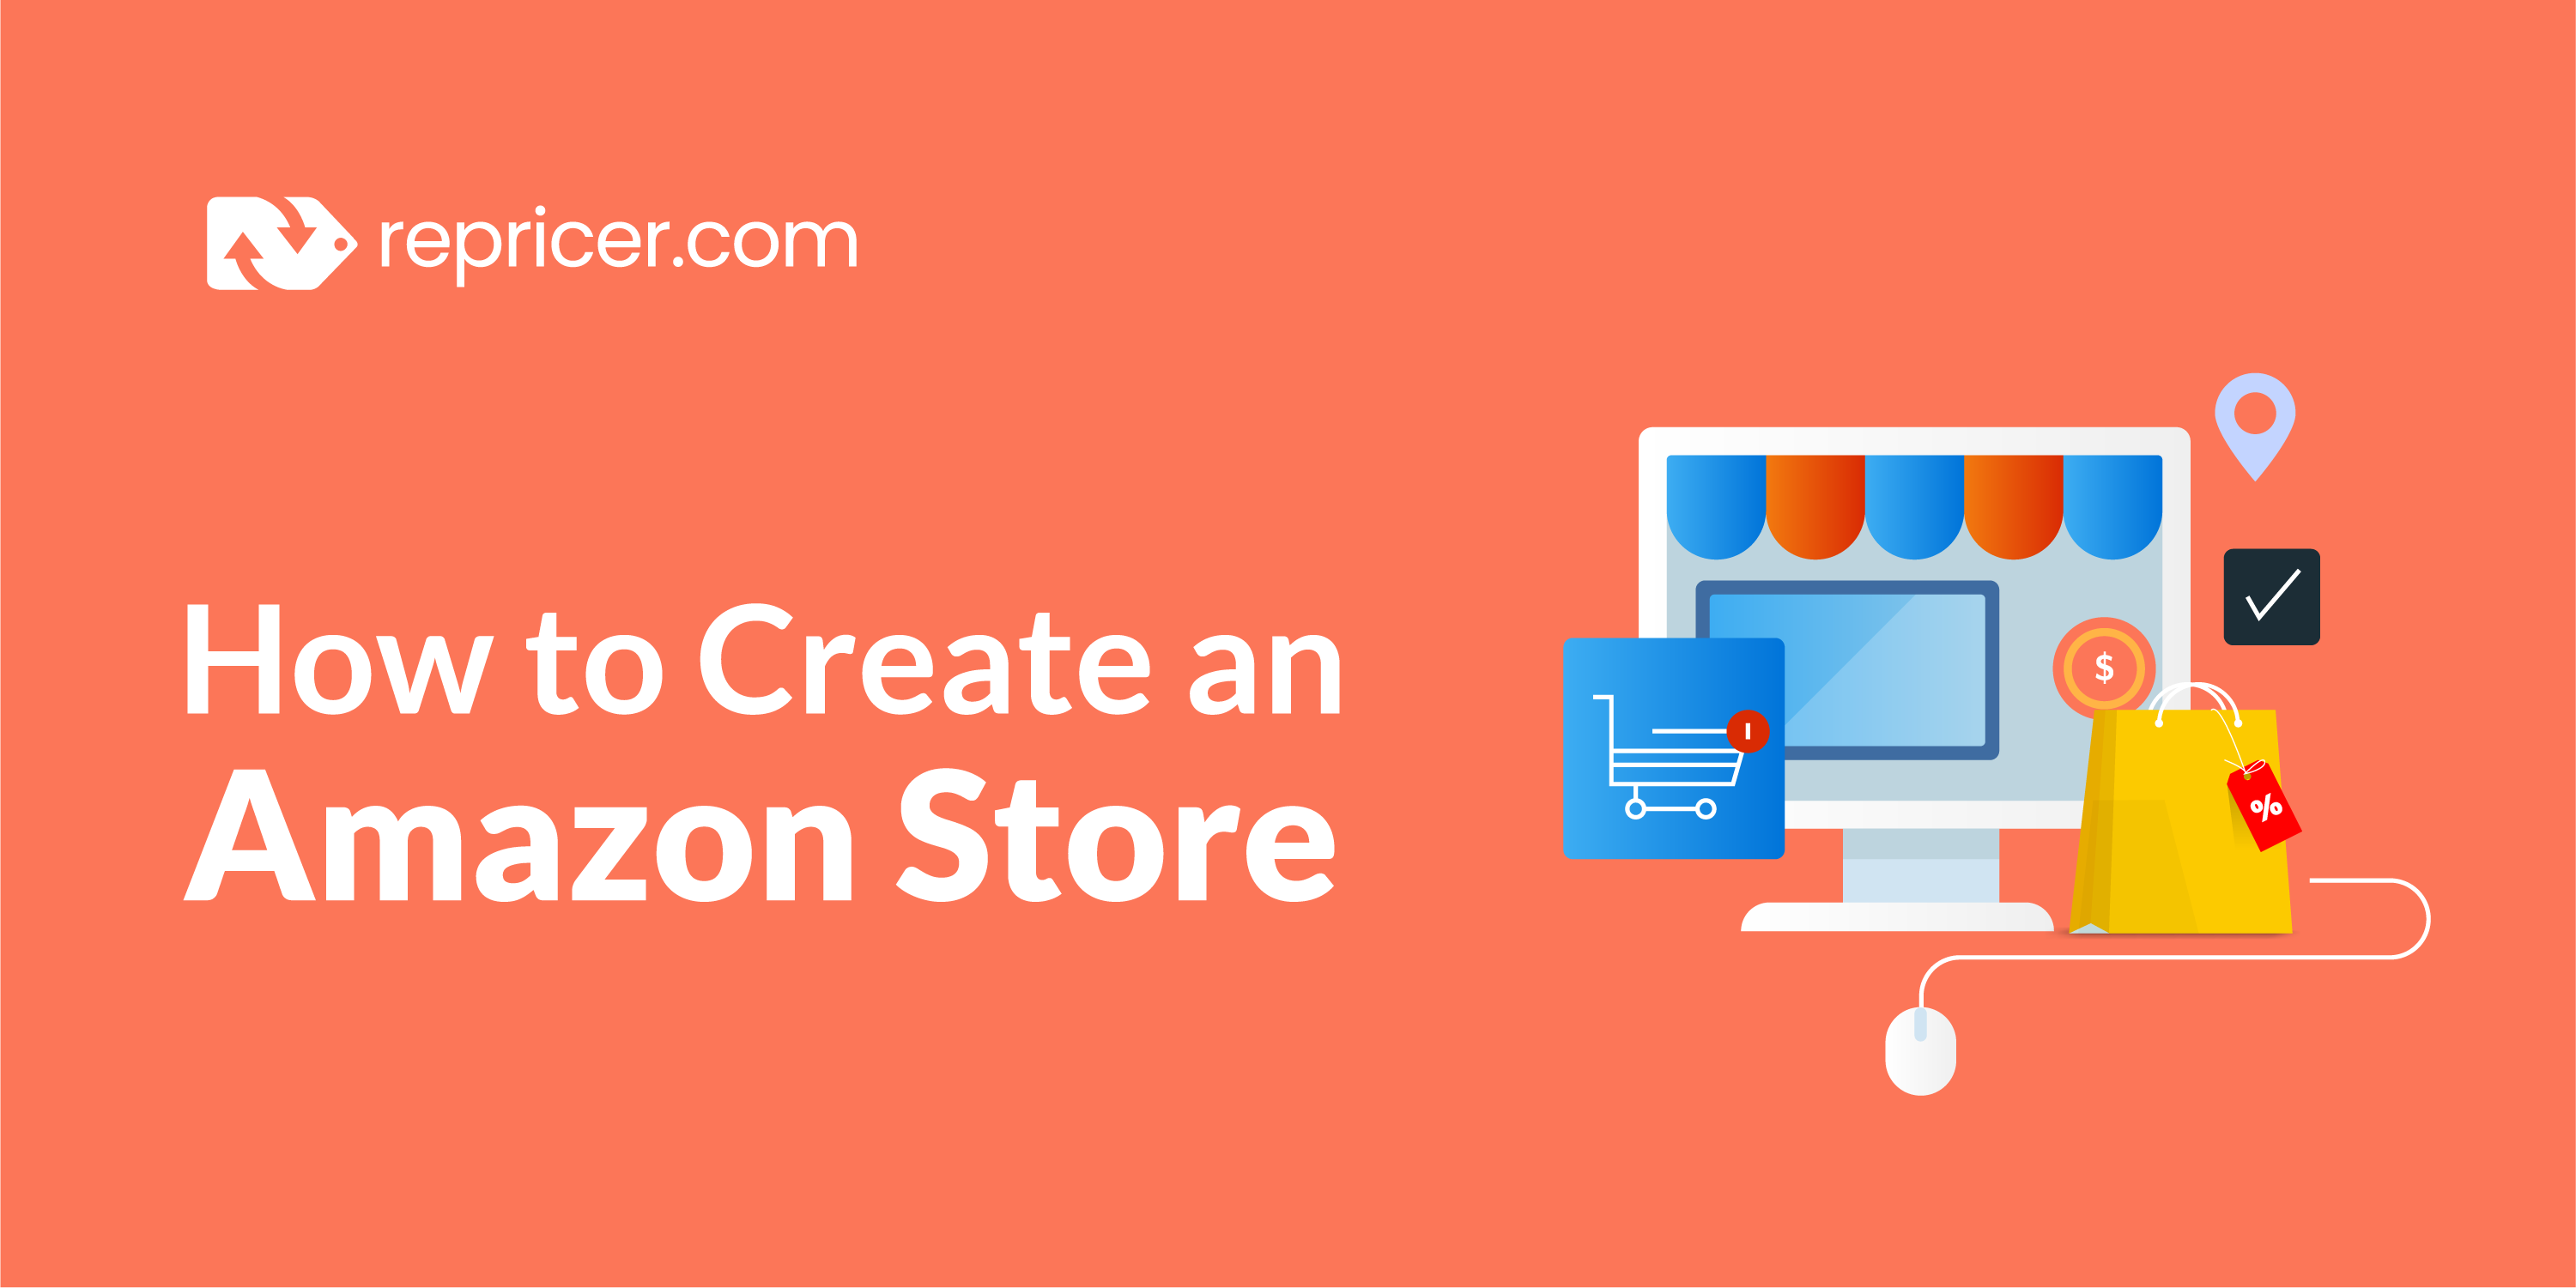 How to Create an Amazon Store